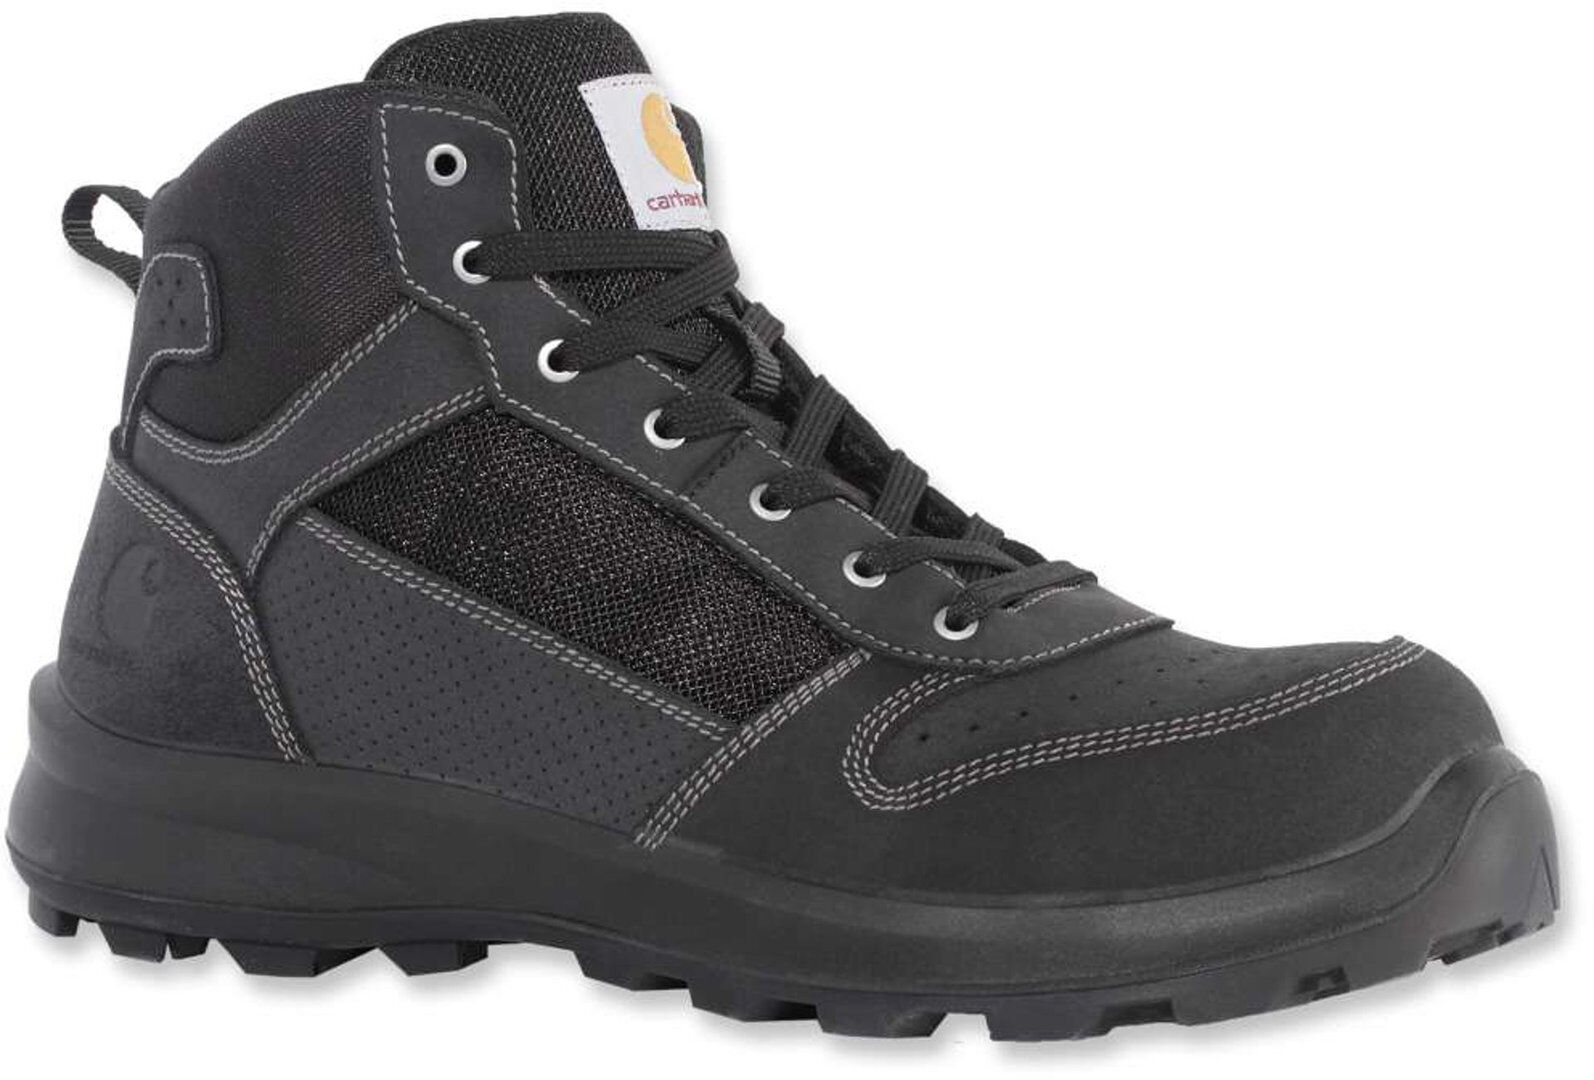 Carhartt Mid S1p Safety Boots  - Black